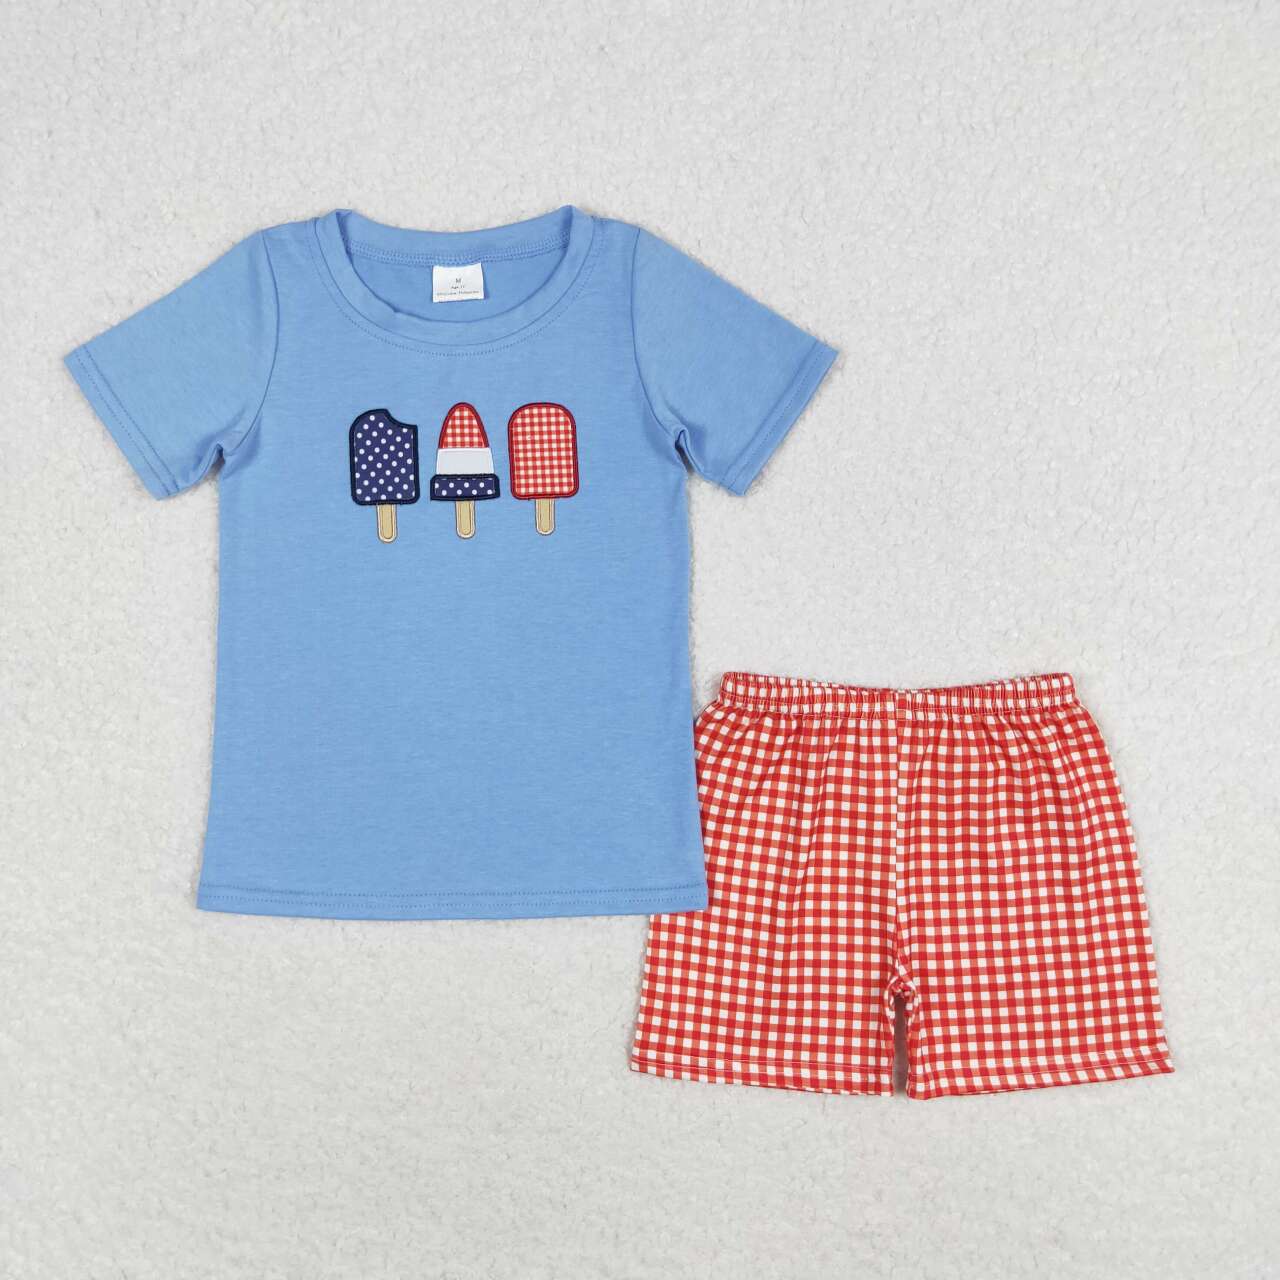 BSSO0744  Popsicle Embroidery Blue Top Red Plaid Shorts Boys 4th of July Clothes Set